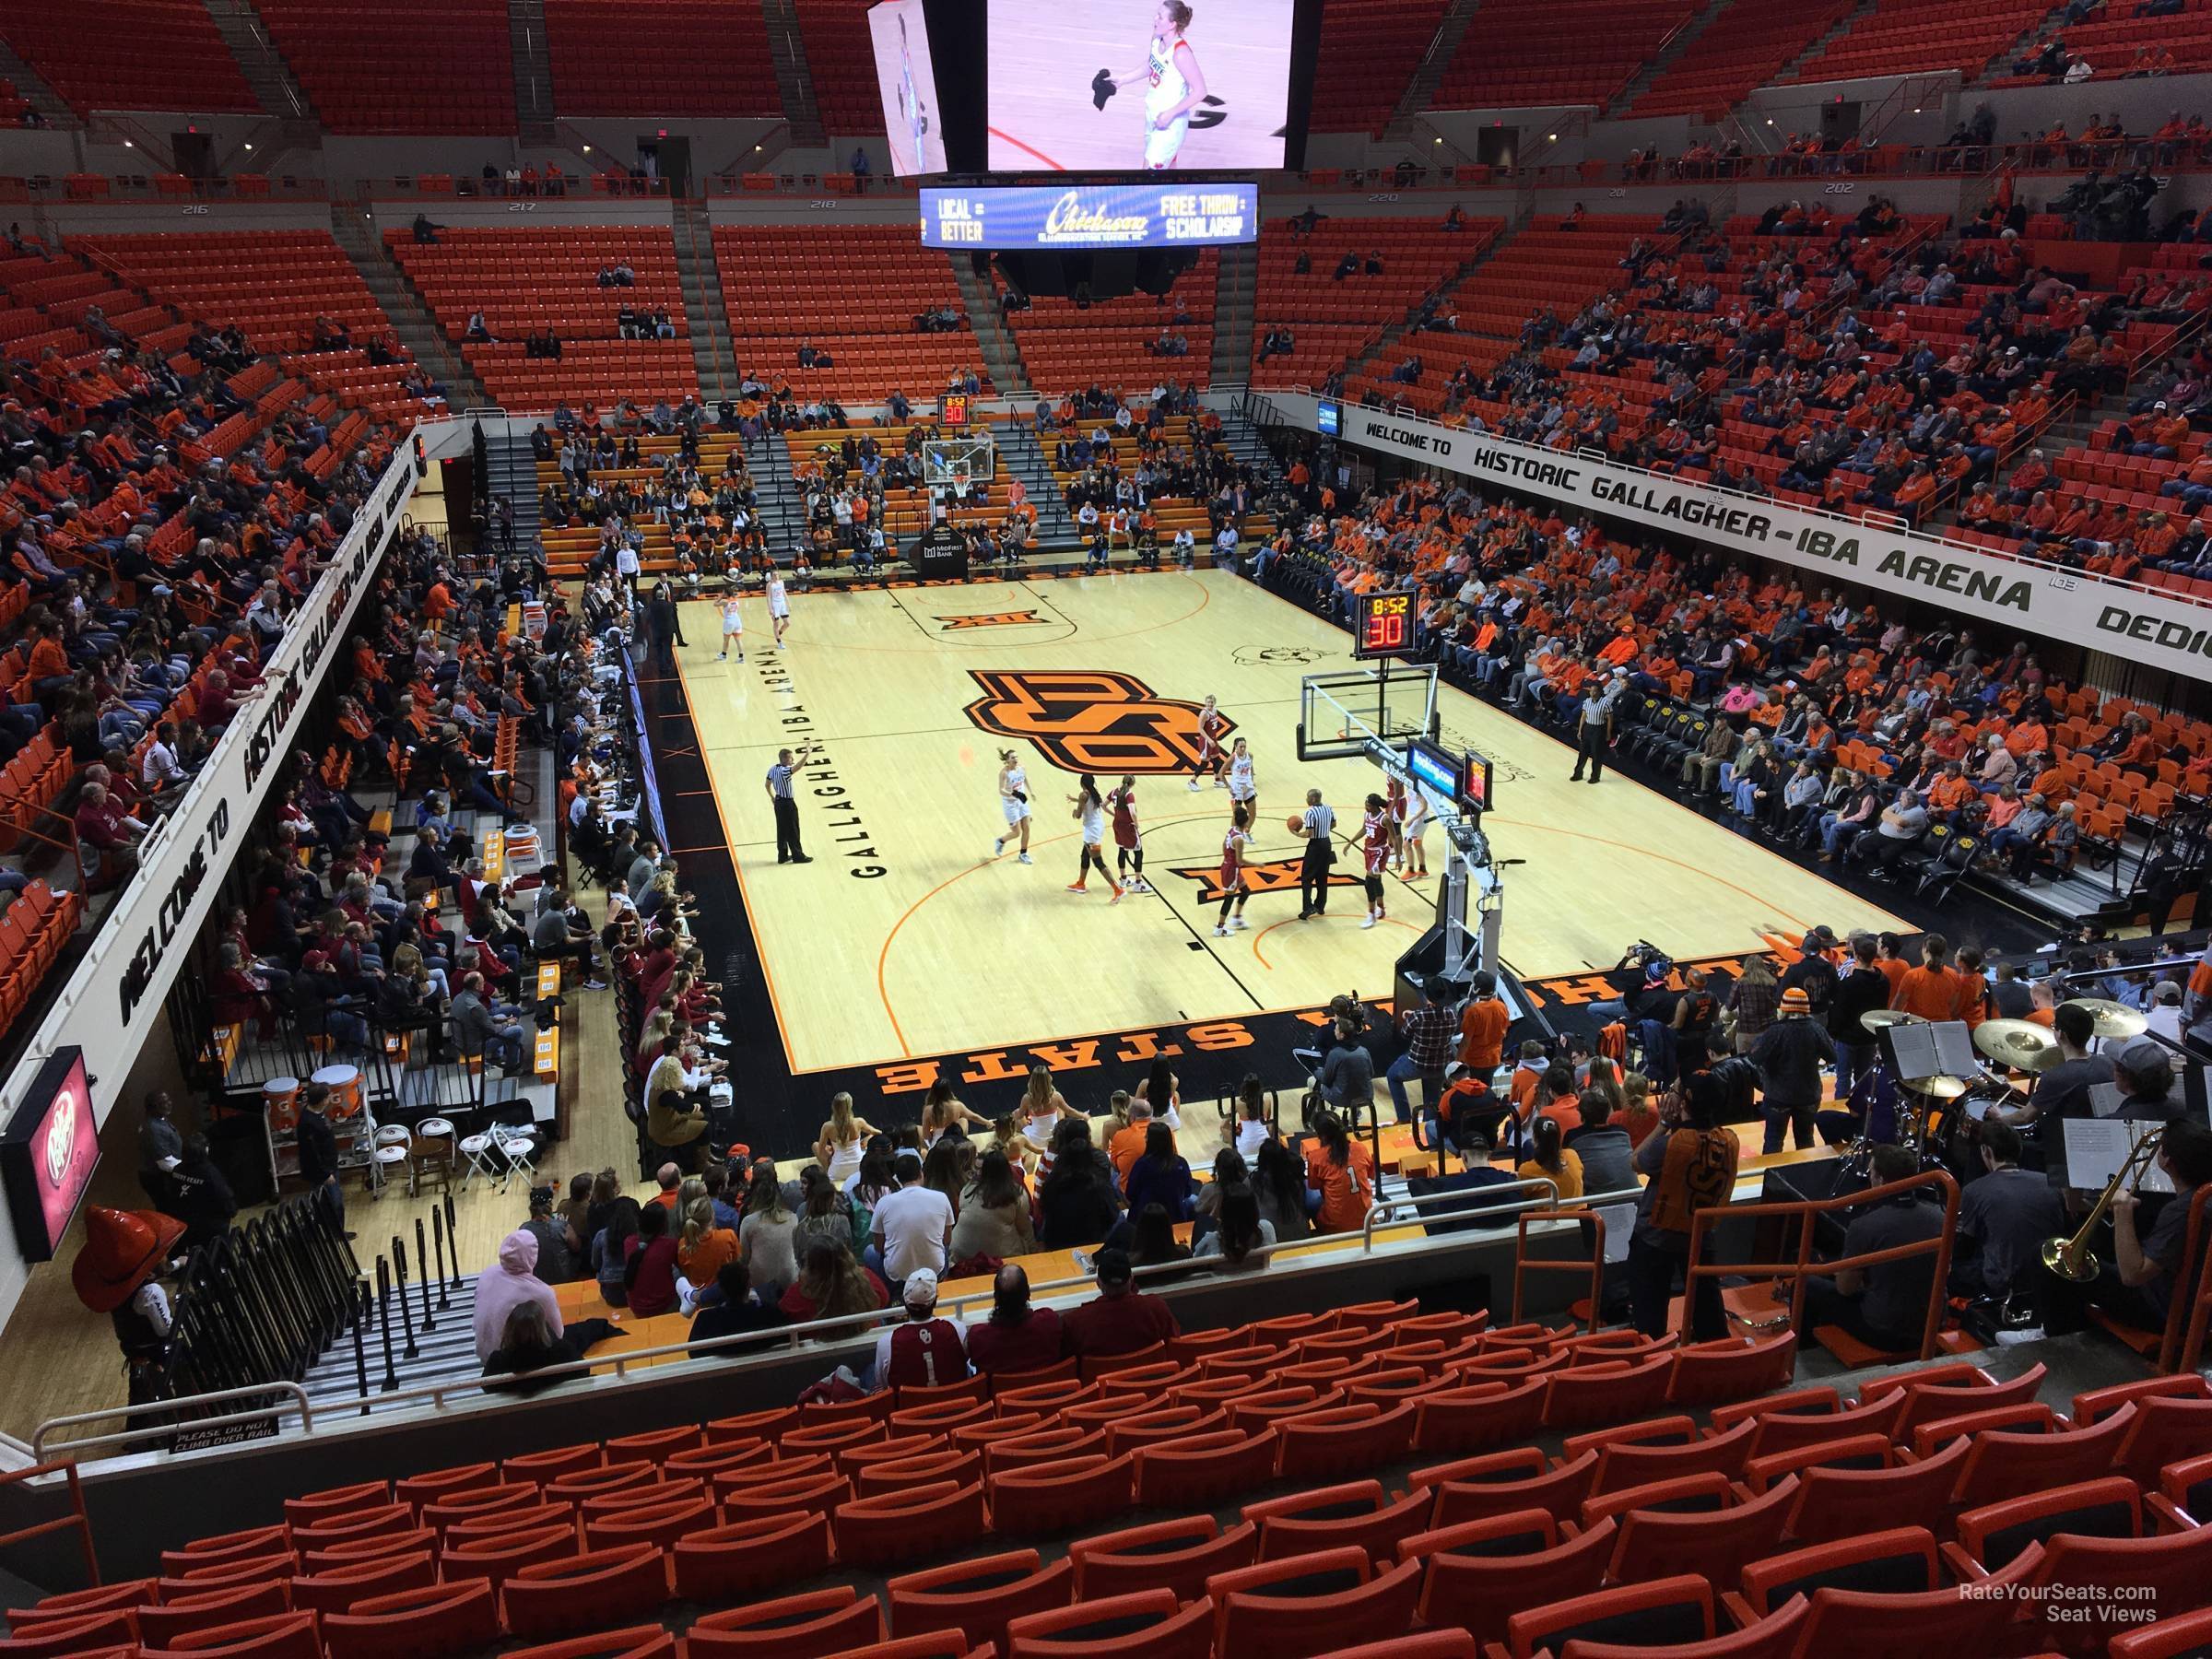 section 209, row 13 seat view  - gallagher-iba arena